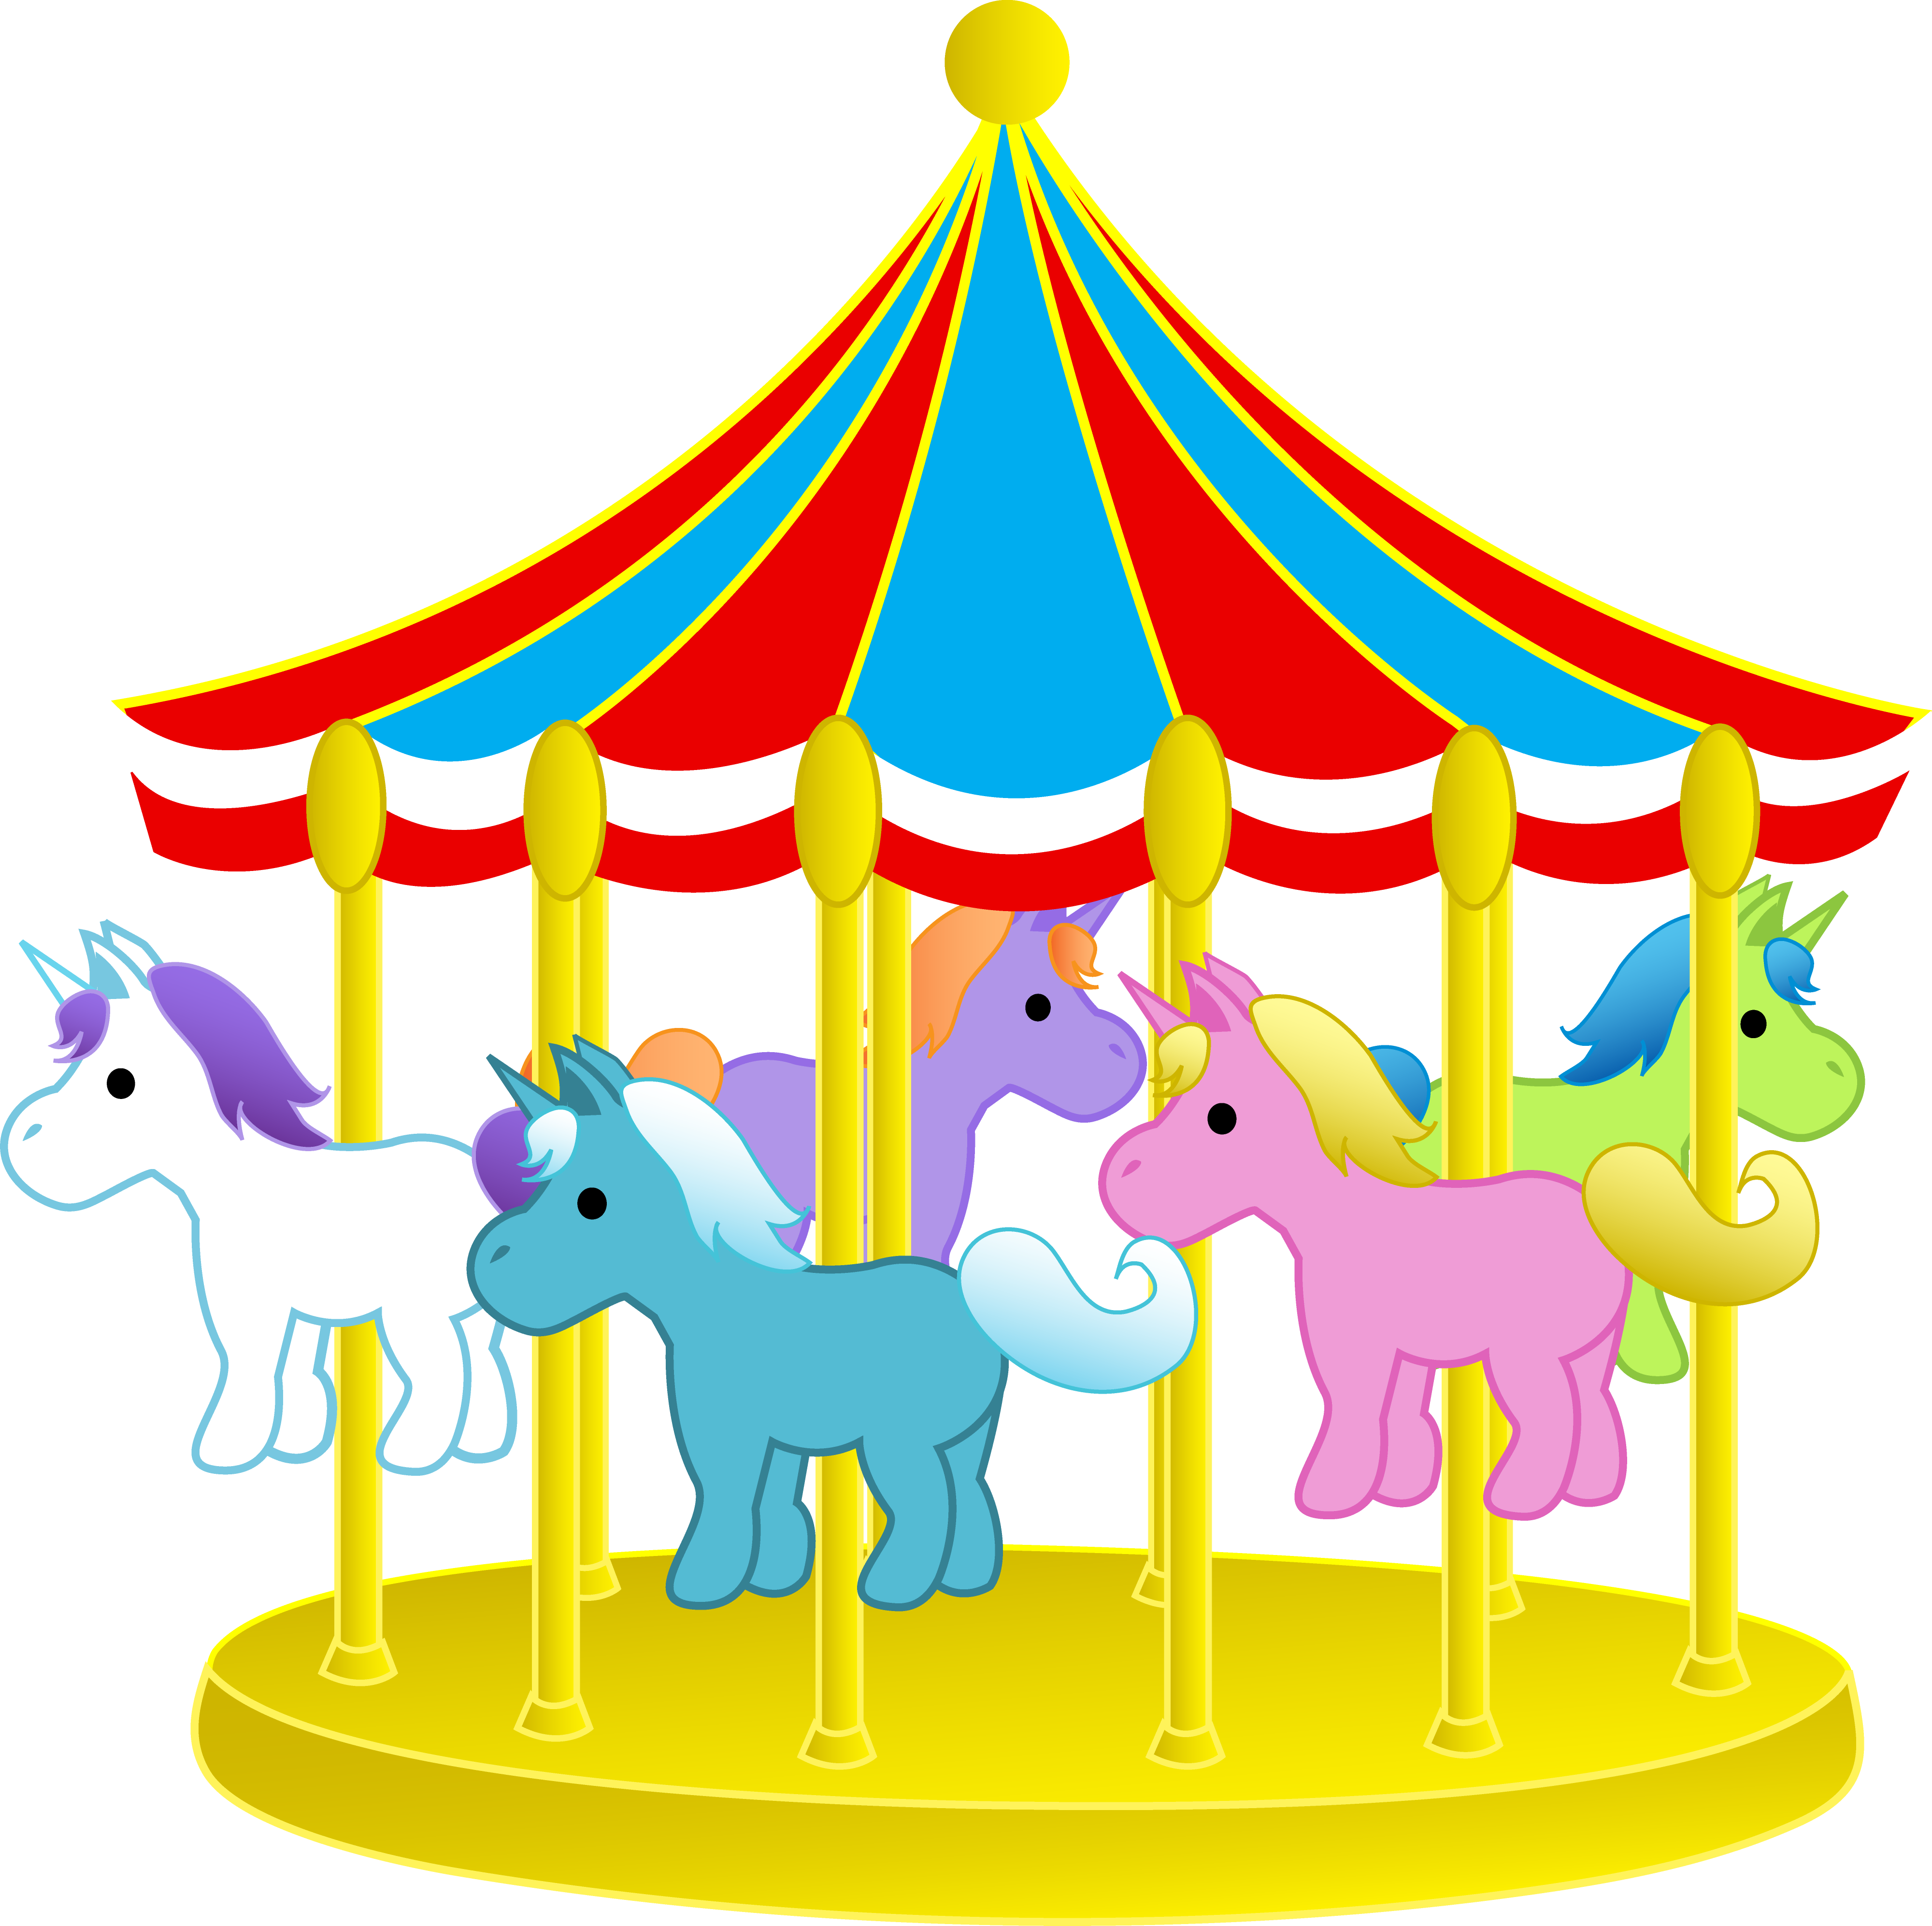 Volunteering clipart carnival. Cute carousel with ponies